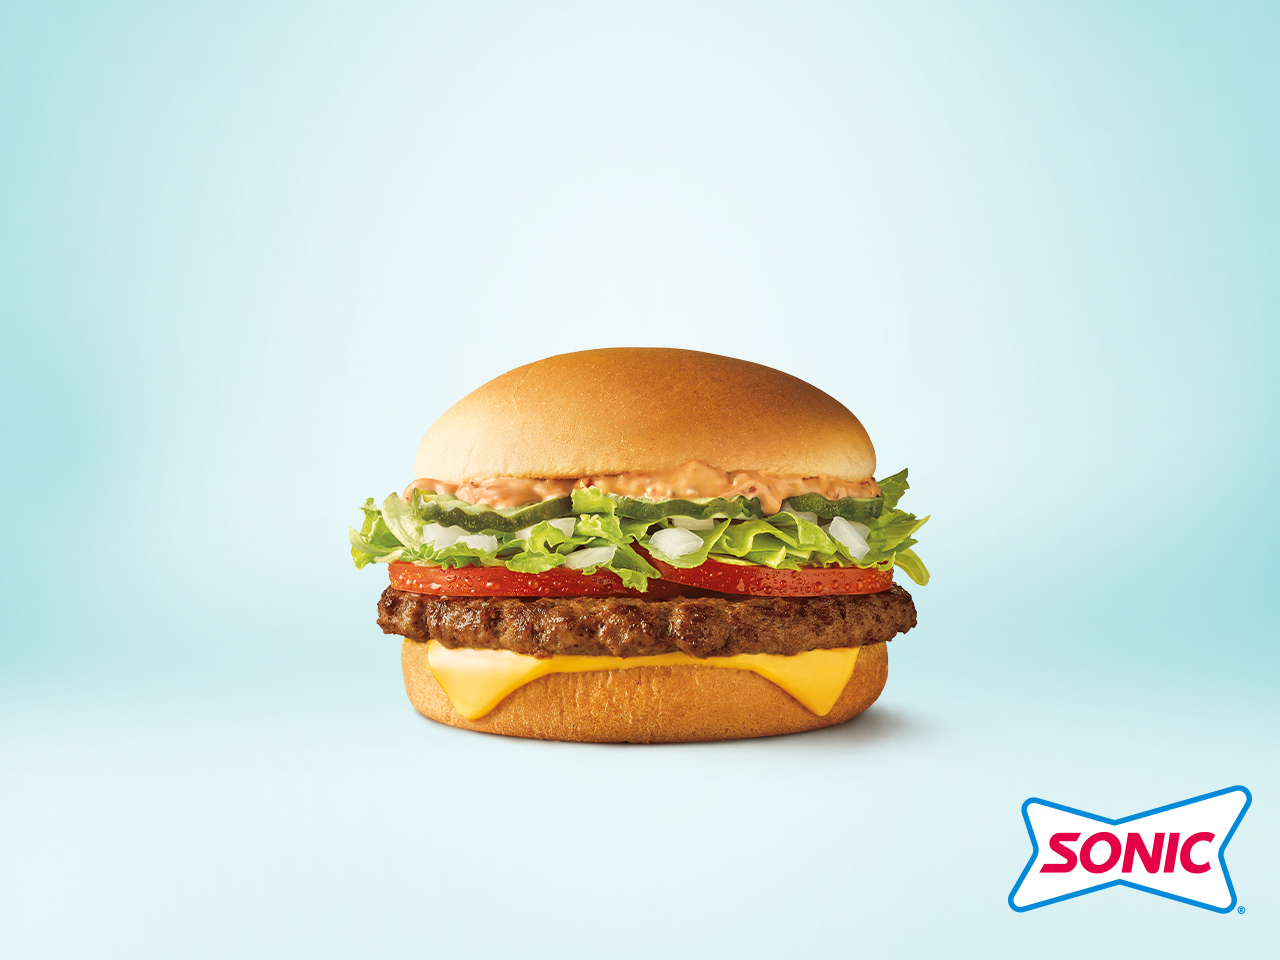 SONIC Debuts New SONIC Crave Cheeseburger With Secret Sauce ...